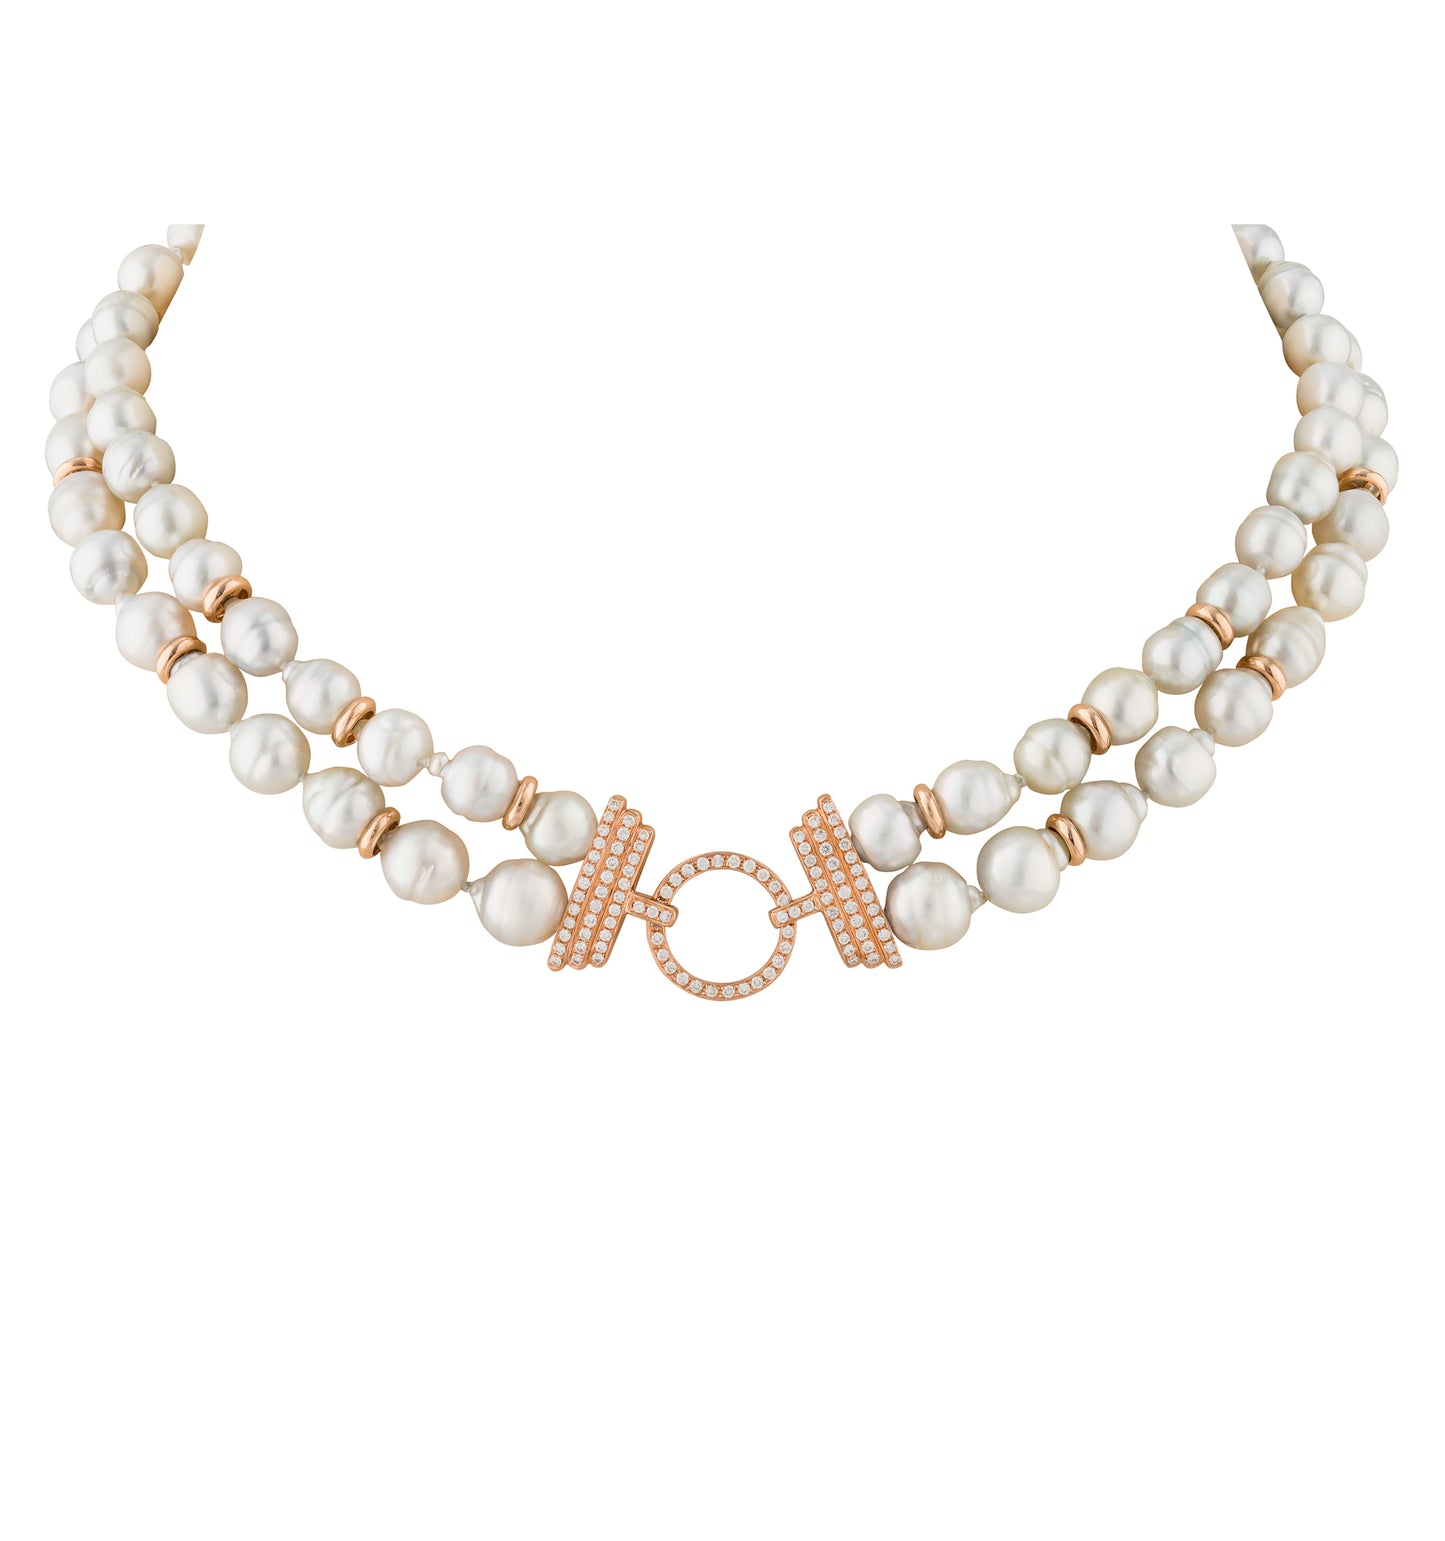 18KT Rose Gold Necklace with White Baroque South Sea Pearl & Diamonds